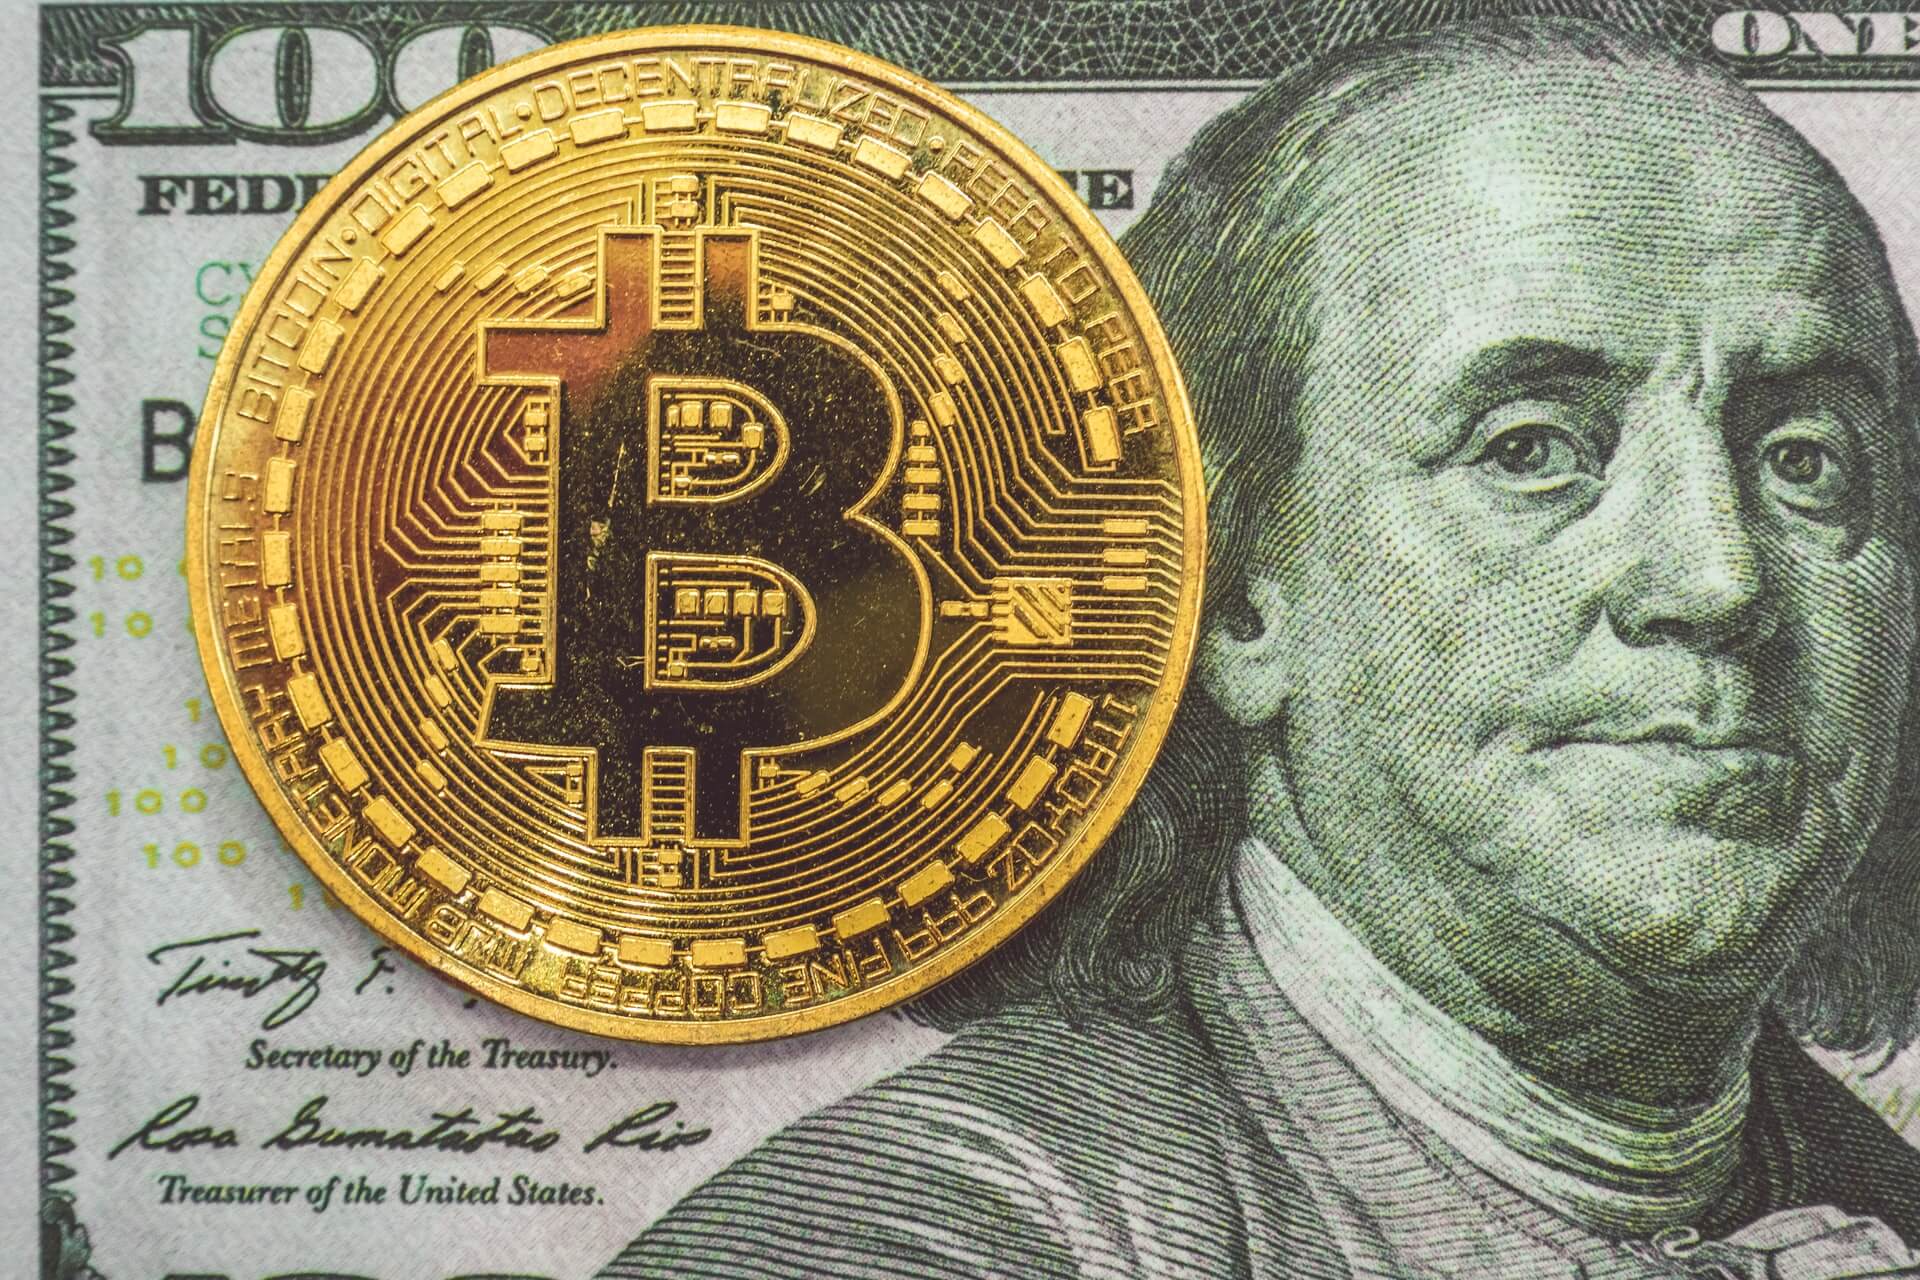 A Bitcoin on top of a $100 bill